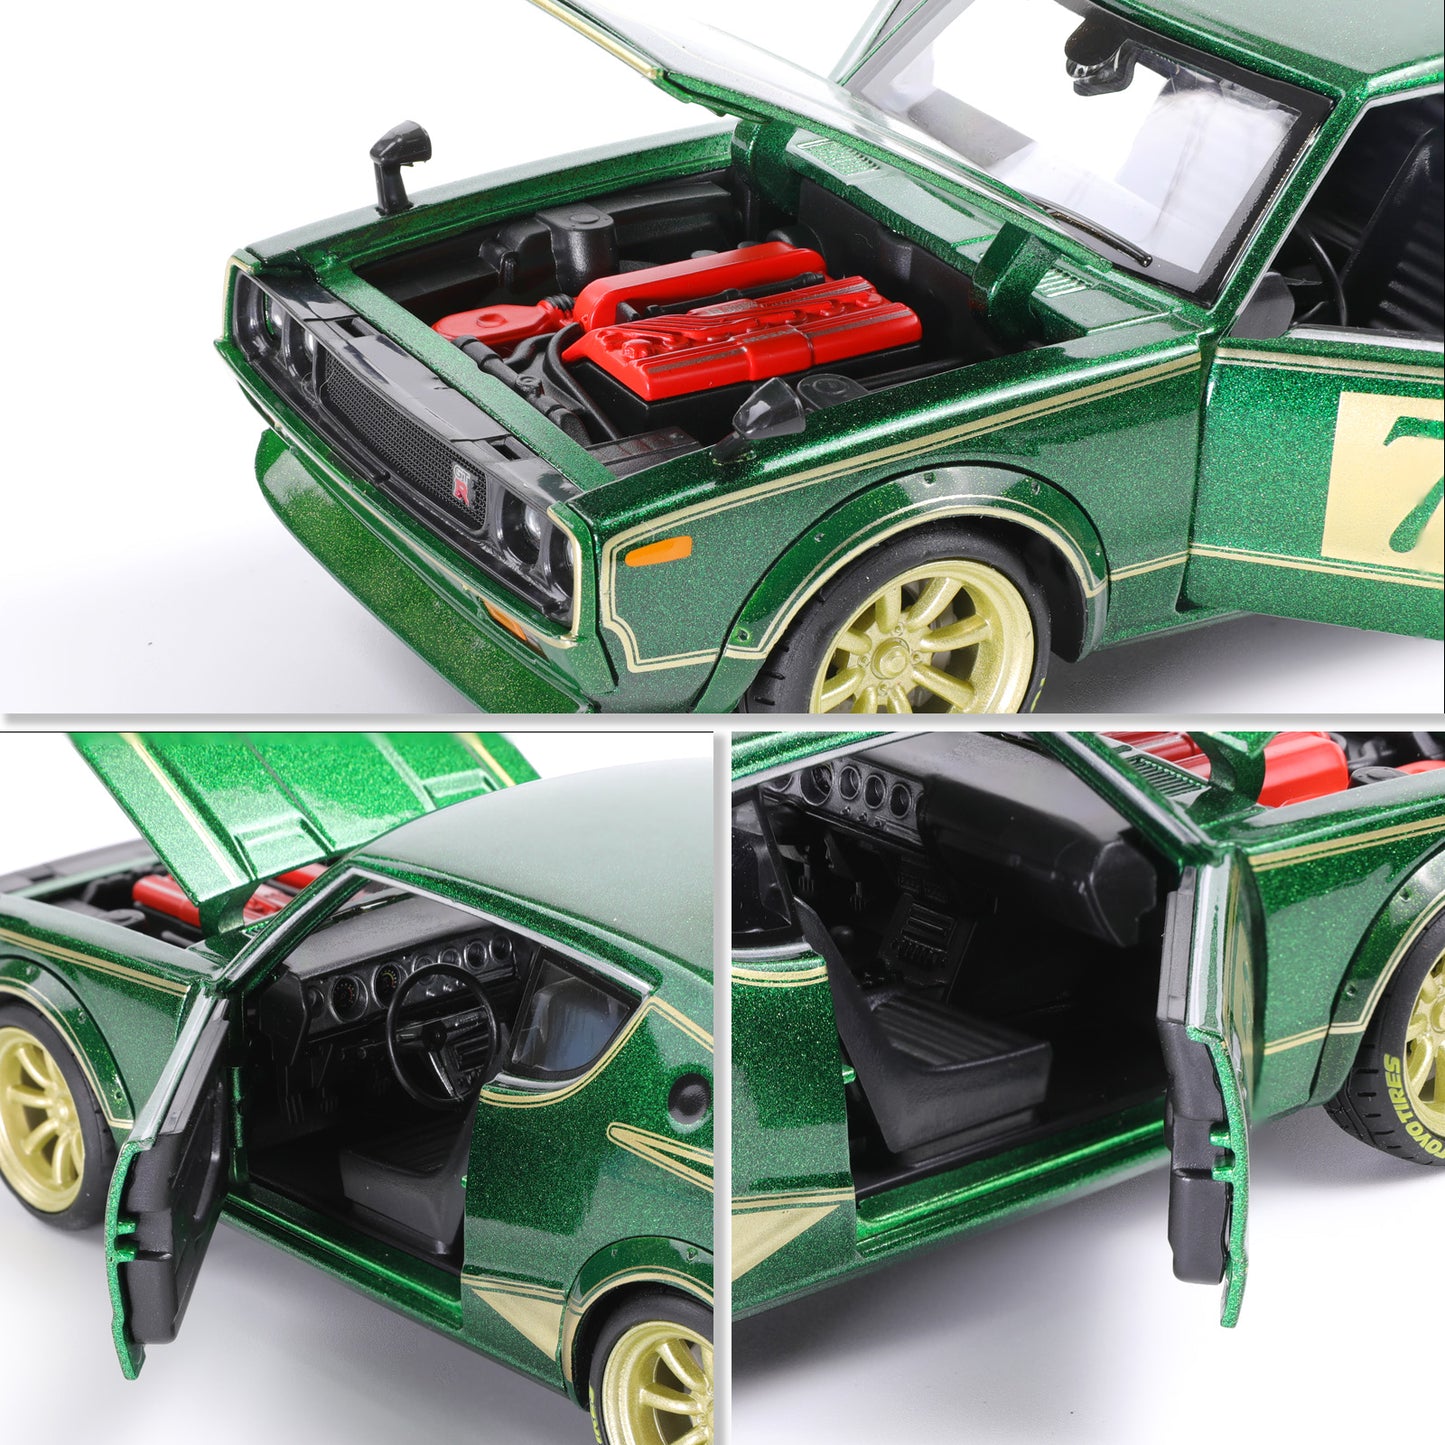 MAISTO 1:24 Scale 1973 NISSAN Skyling 2000GT-R (KPGC110) Die Cast Metal Toy Cars Building Kit Collectible & Gift for Kids